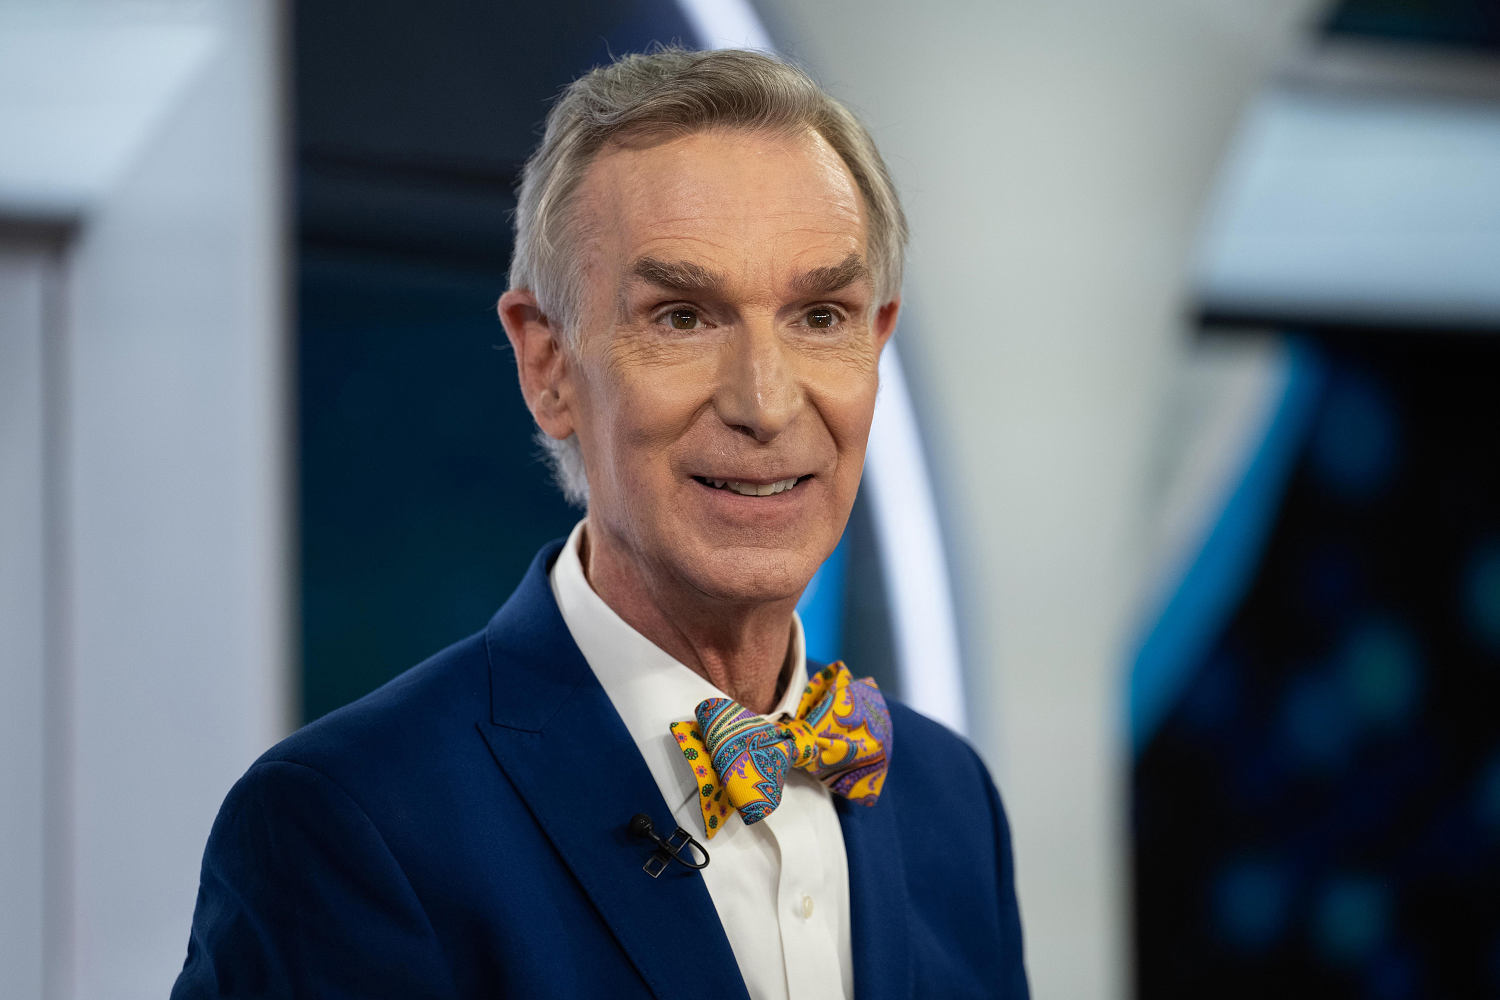 Bill Nye eclipses our wildest expectations with his latest photo shoot